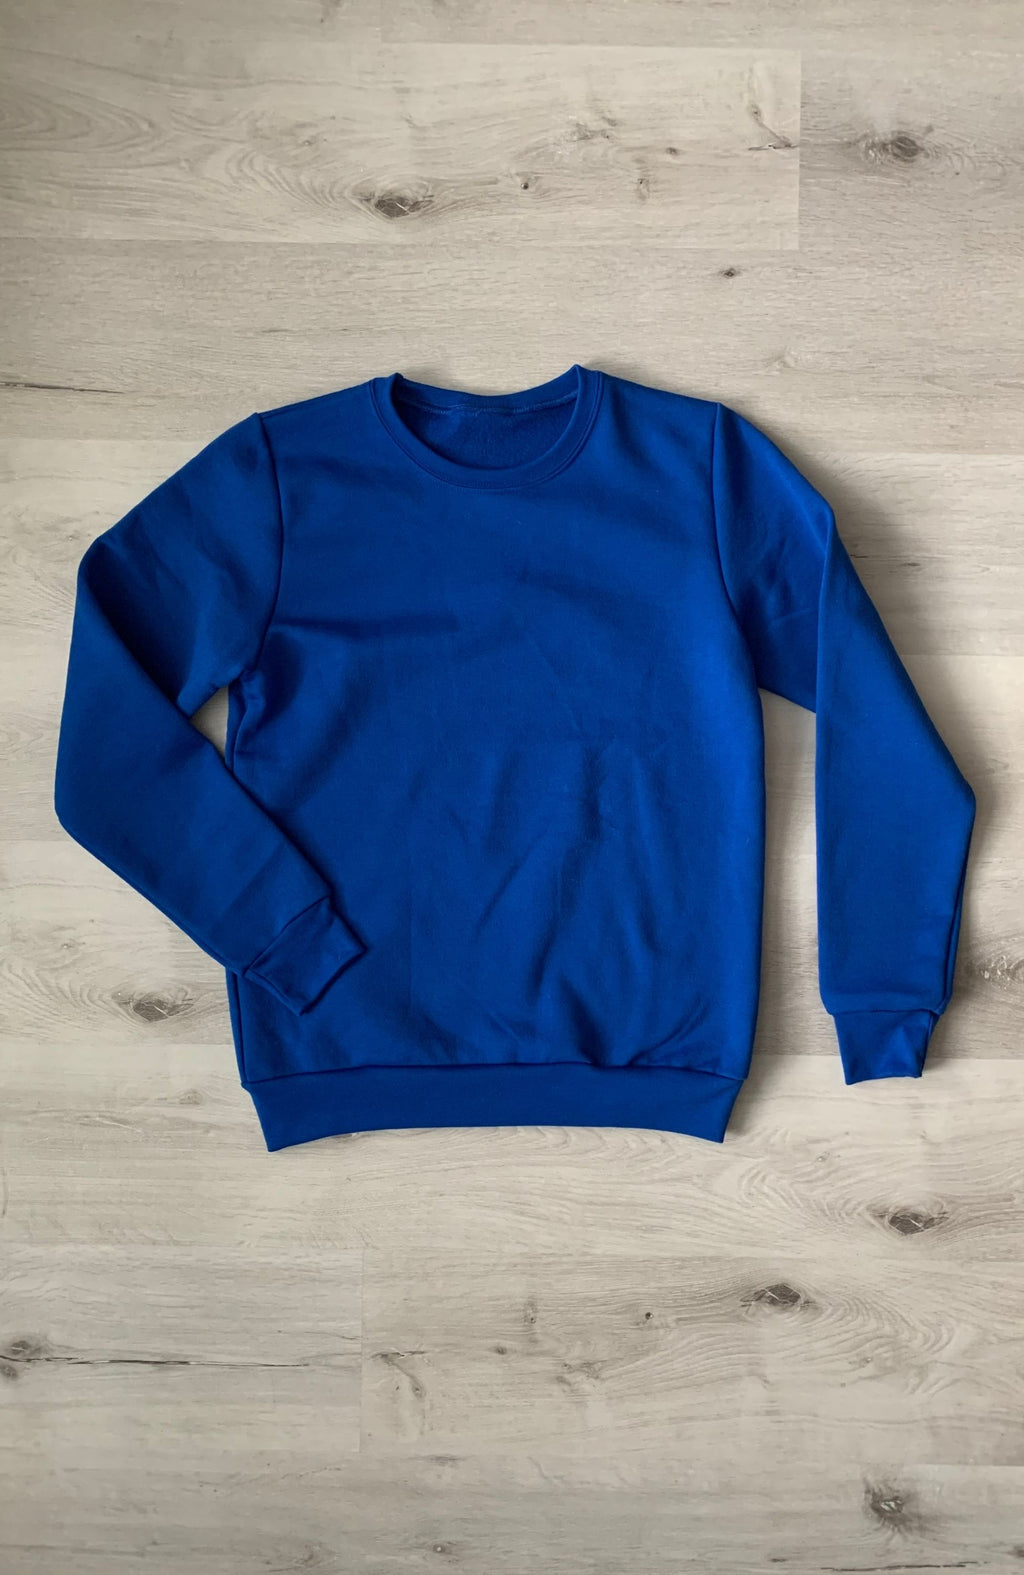 Shop Sweat Society - Ethical Activewear - Canada and US – tagged crewneck